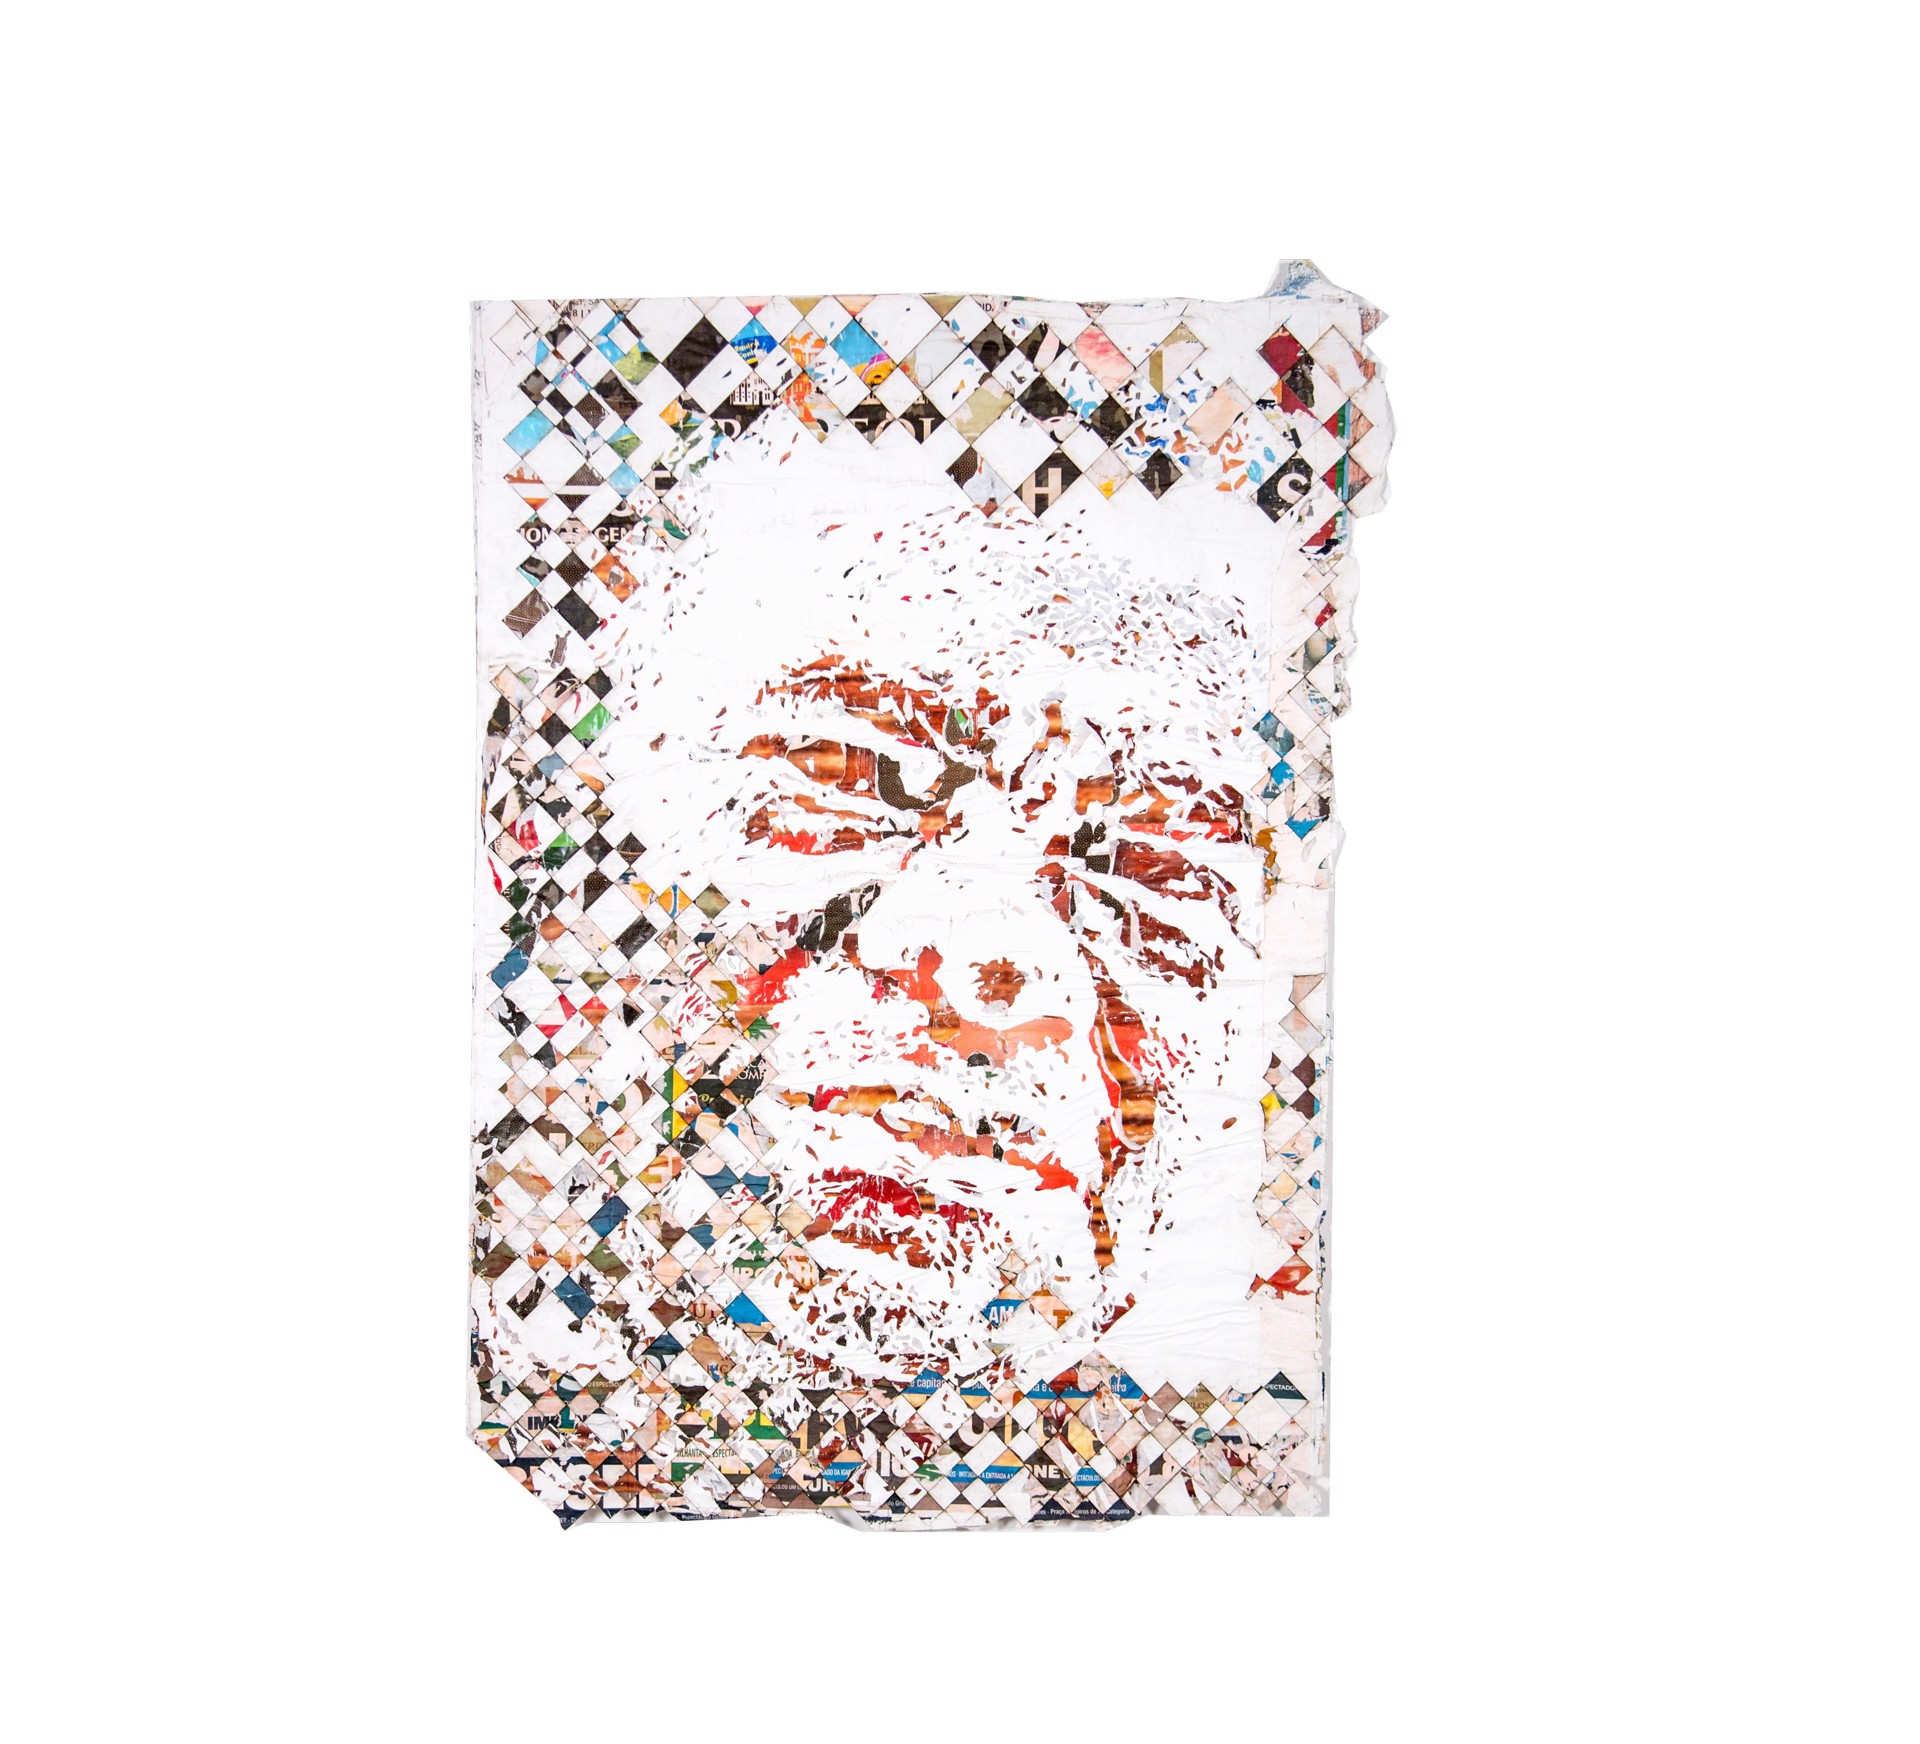 Attrition Series #17 by Vhils